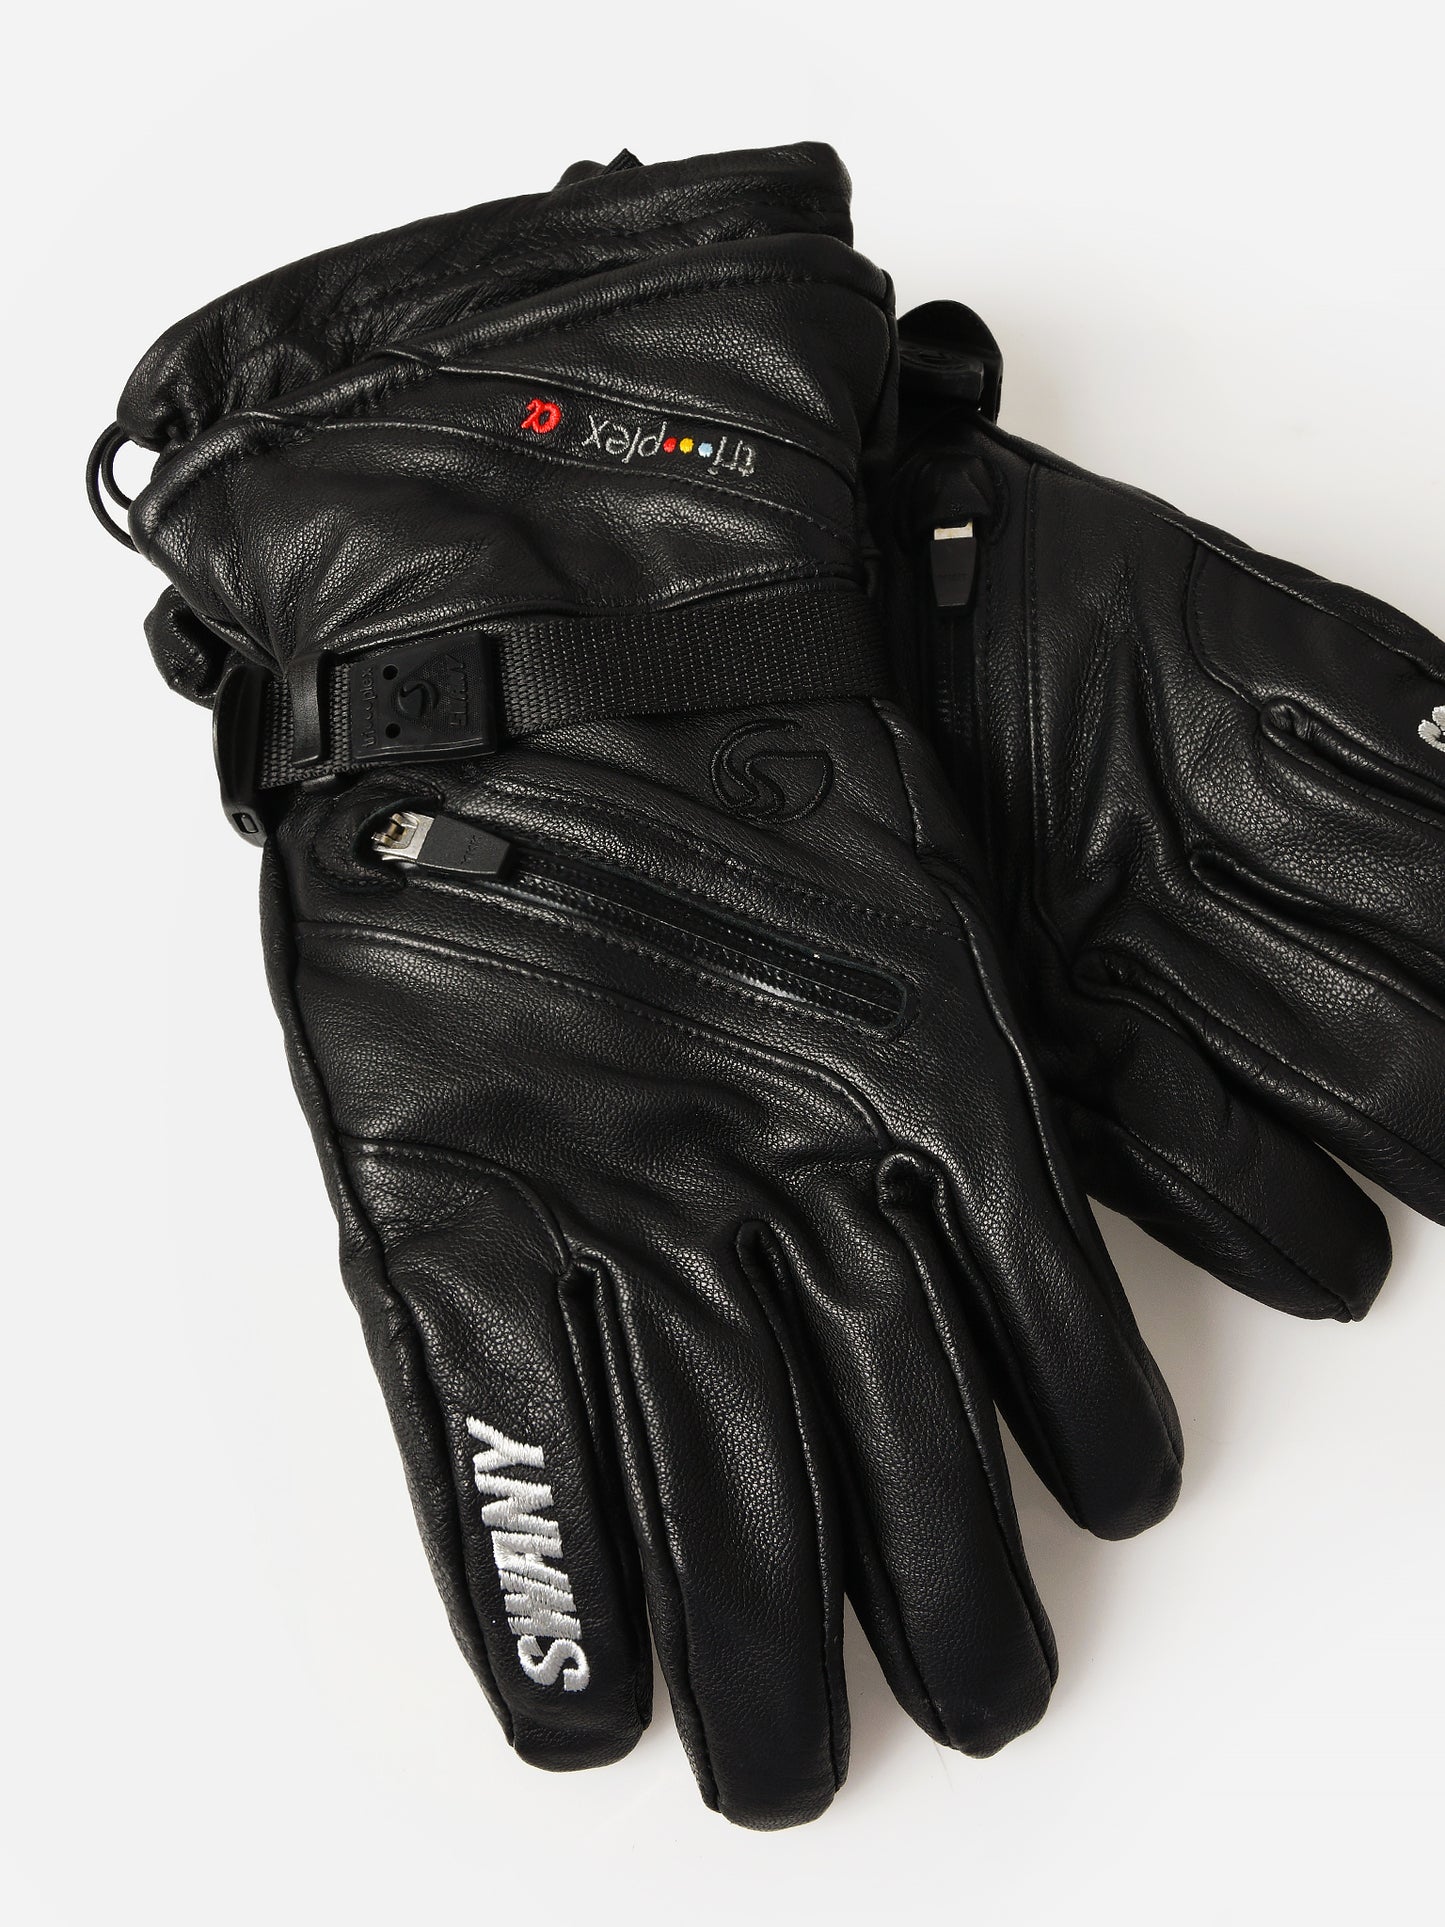 Swany X-Cell 2.1 Glove